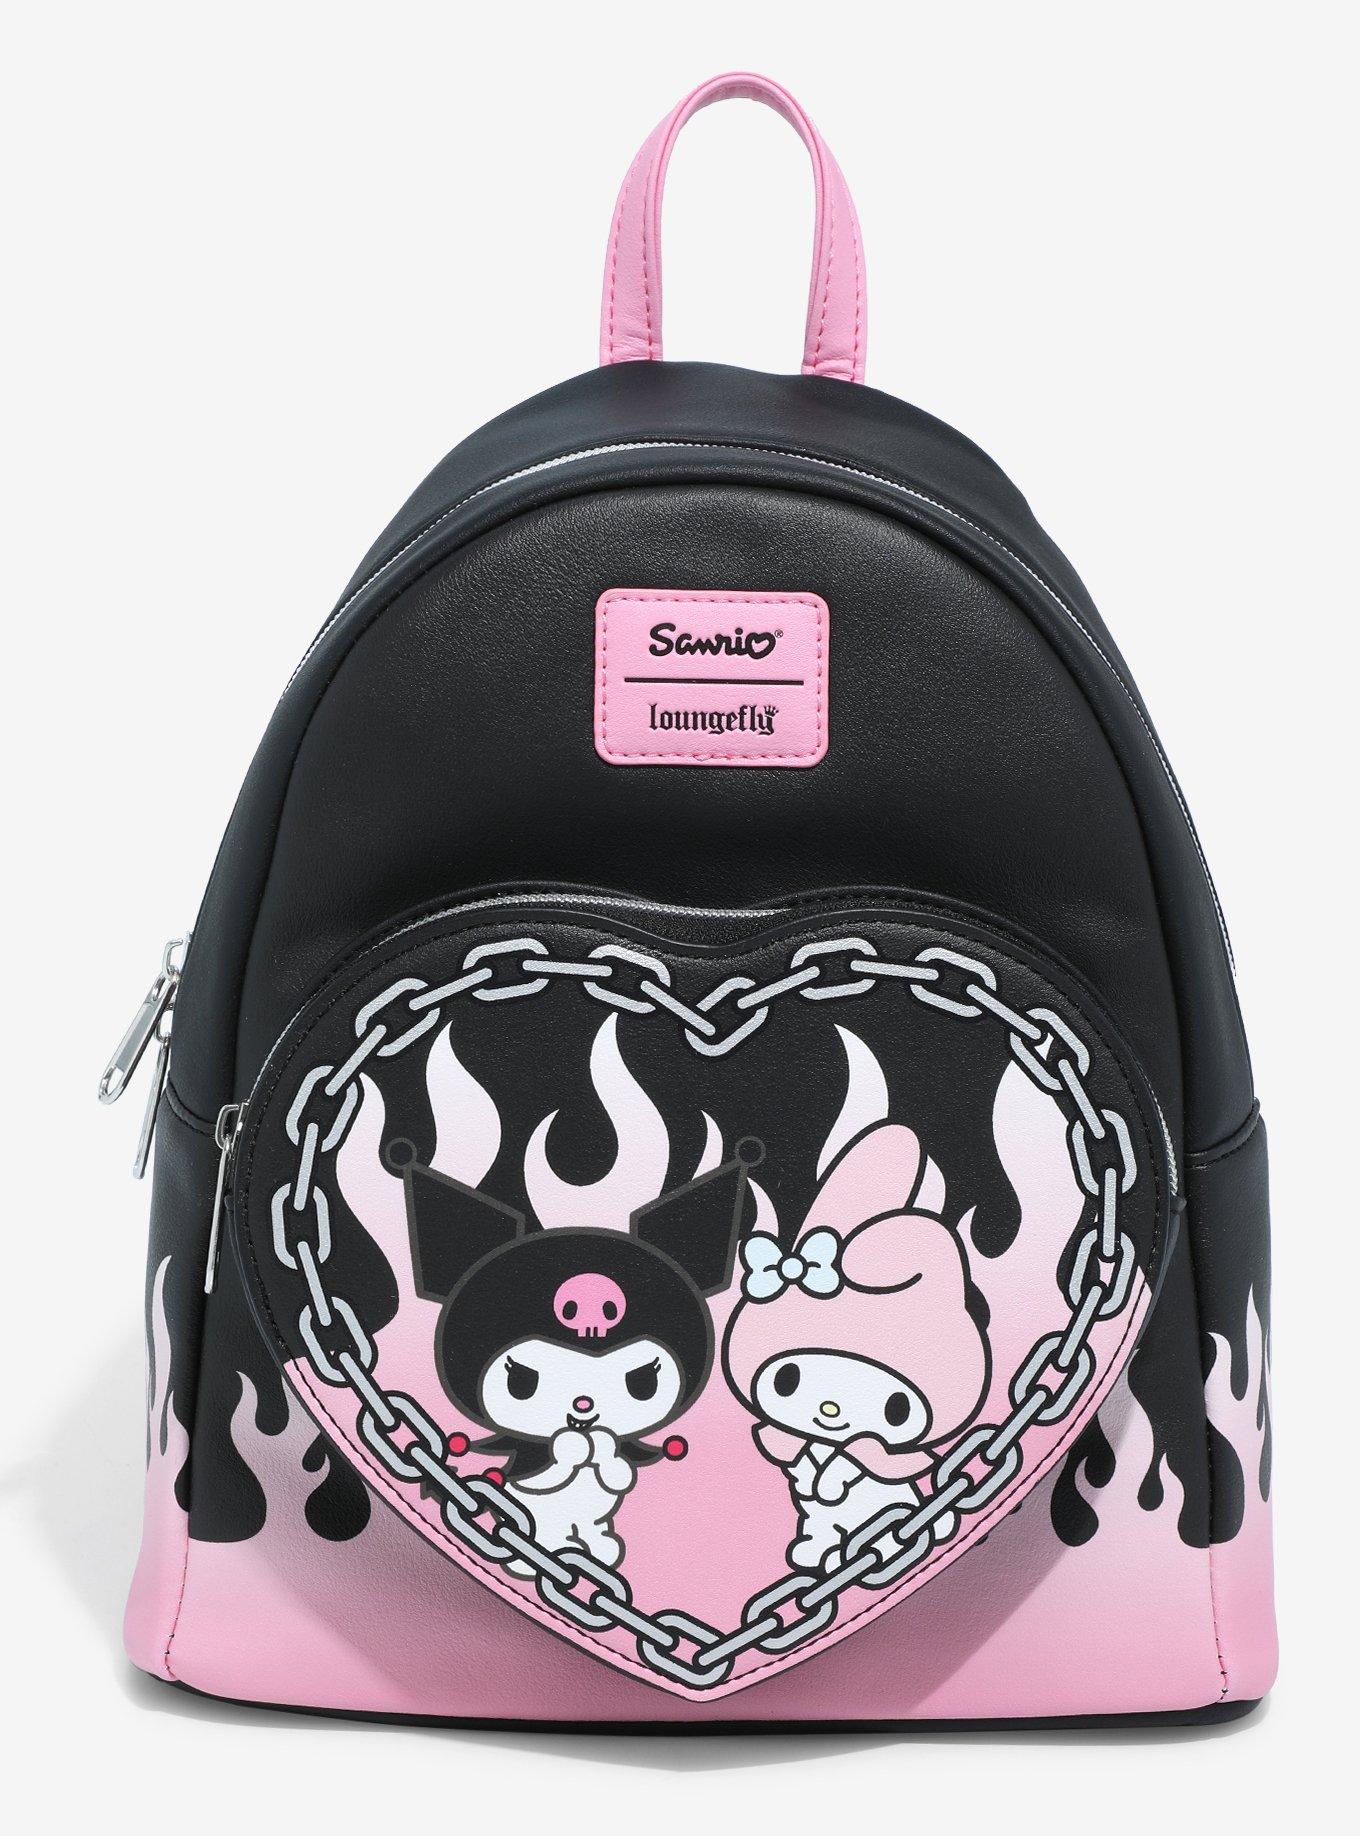 Under One Sky Girl's Shooting Heart Backpack on SALE